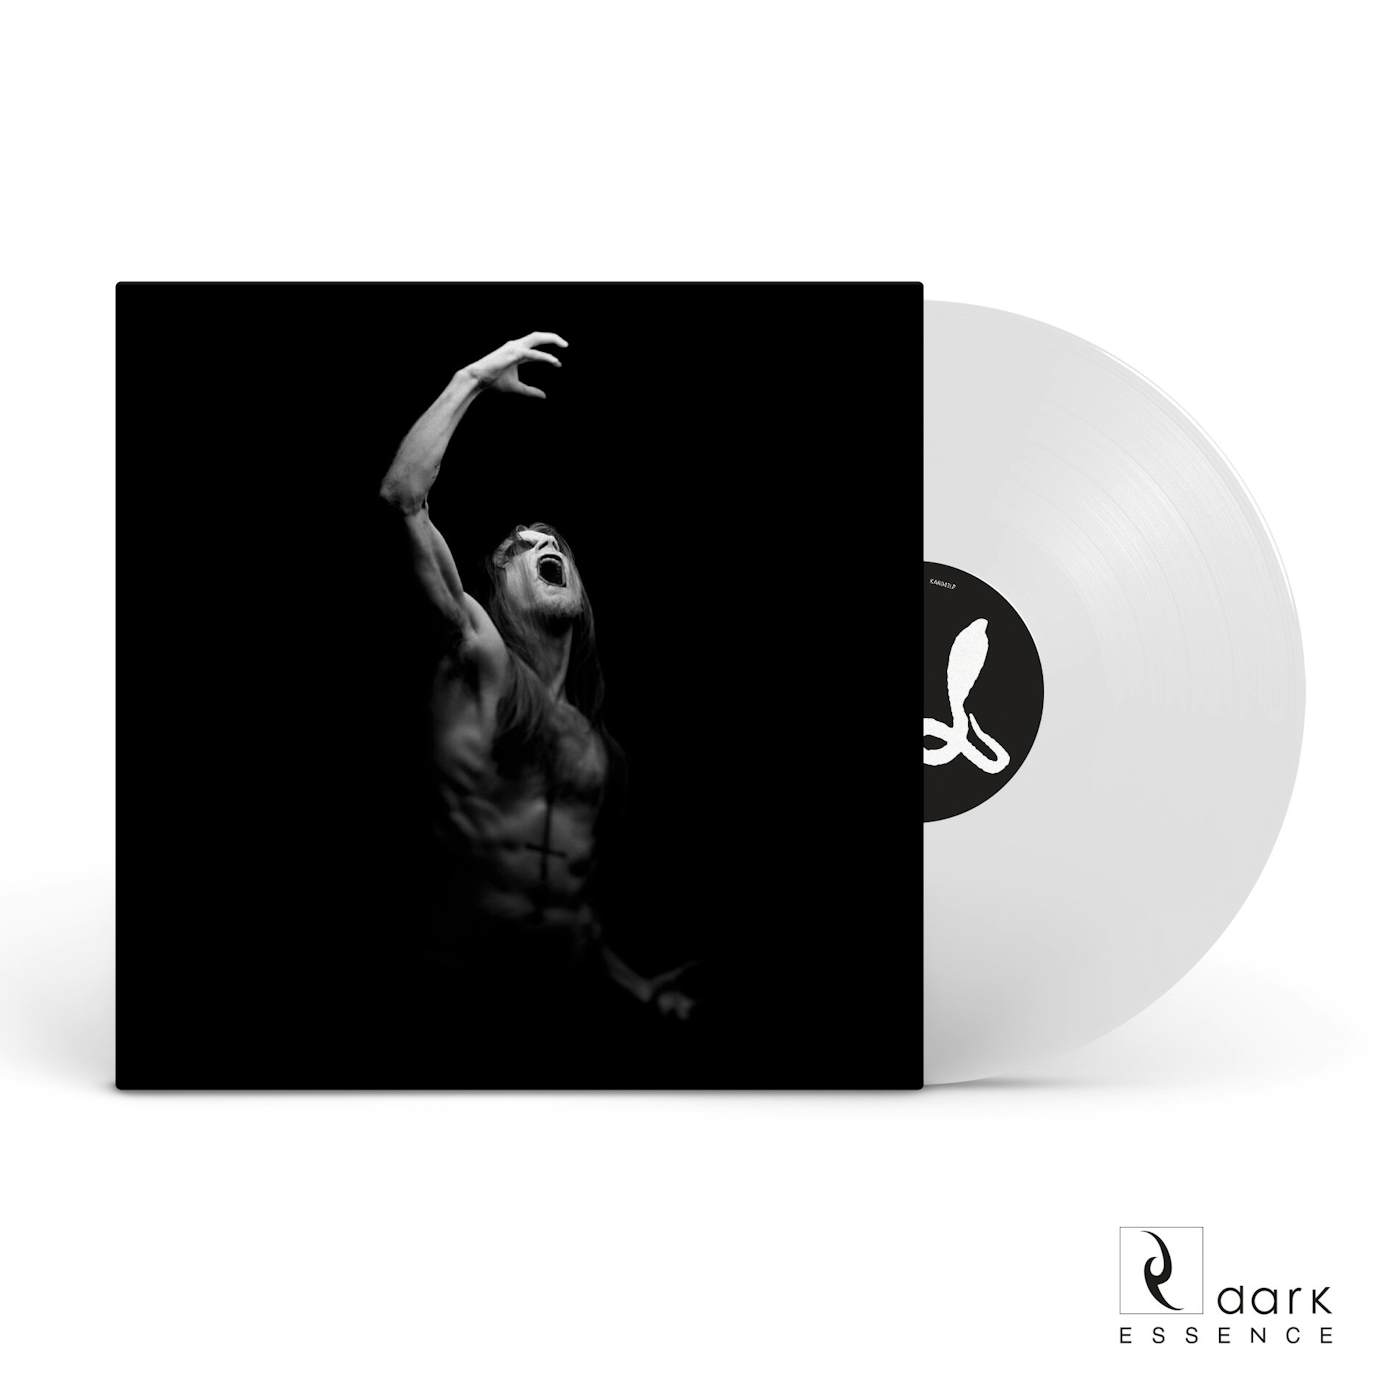 Taake "Taake" Limited Edition 12"